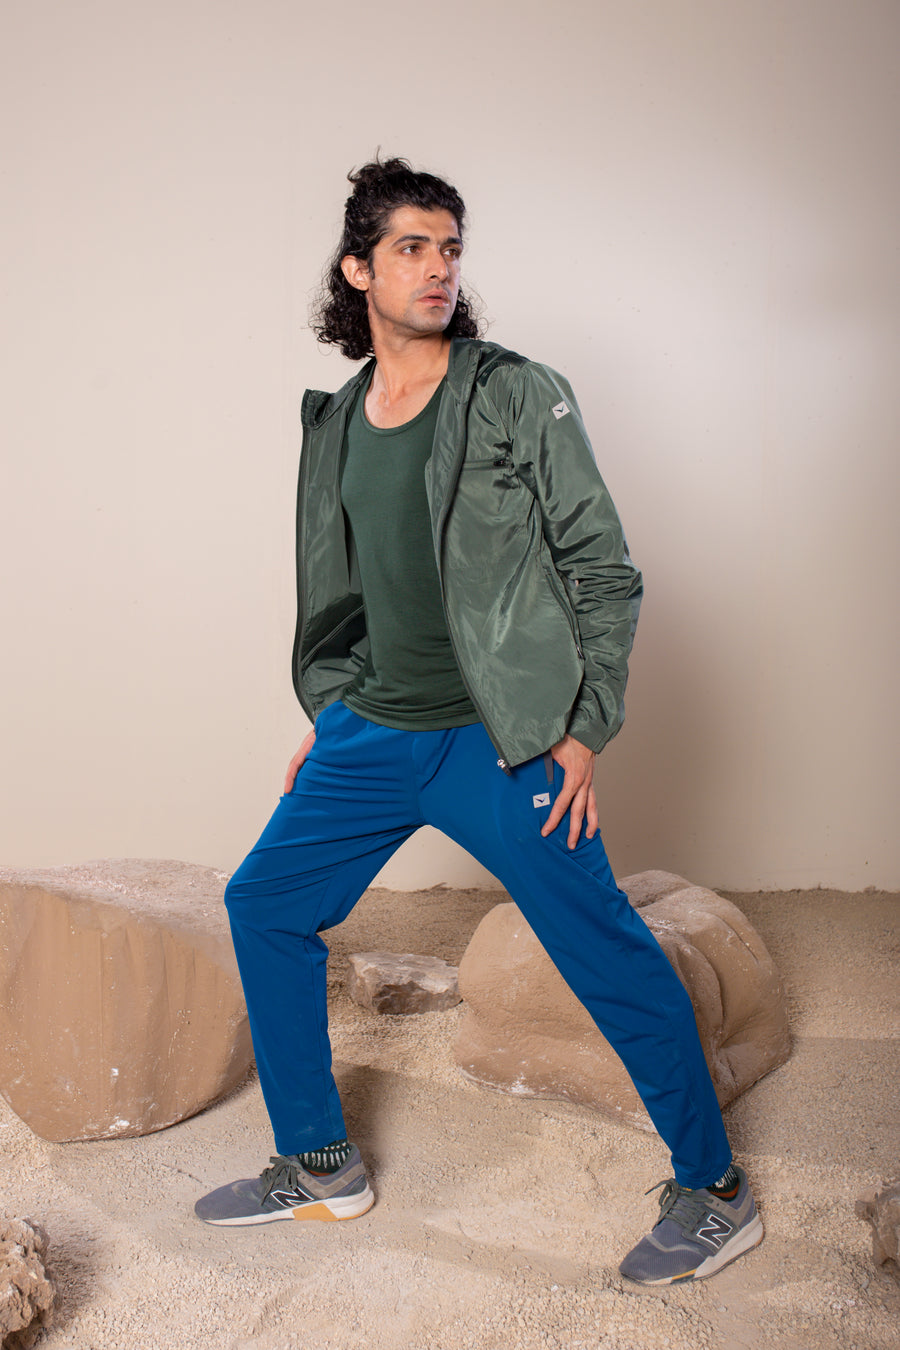 Men's Wanderlust Pant Blue Teal | VOLO Apparel | These pants are designed to give you wanderlust, an ultralight super durable athletic pant with a five pocket design, a 3 point gusset for all your movements and a high ankle tapered bottom. The revolutional Italian nylon is patented with UPF 50 protection and extreme breathability. The one pant to go everywhere and do everything!